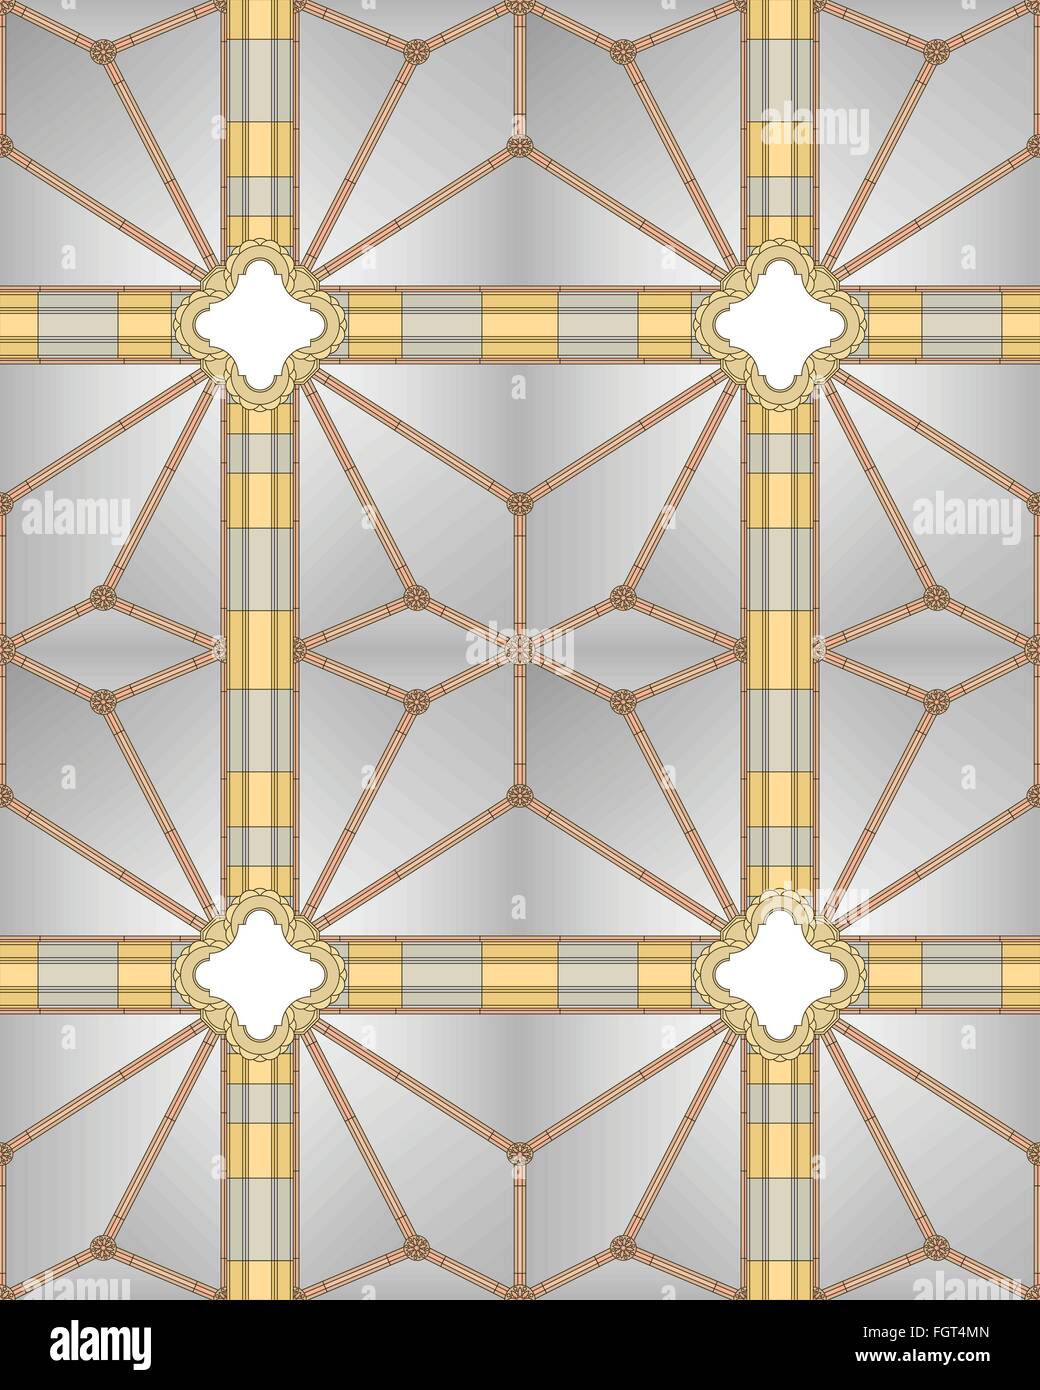 Medieval cathedral ceiling - seamless image Stock Vector